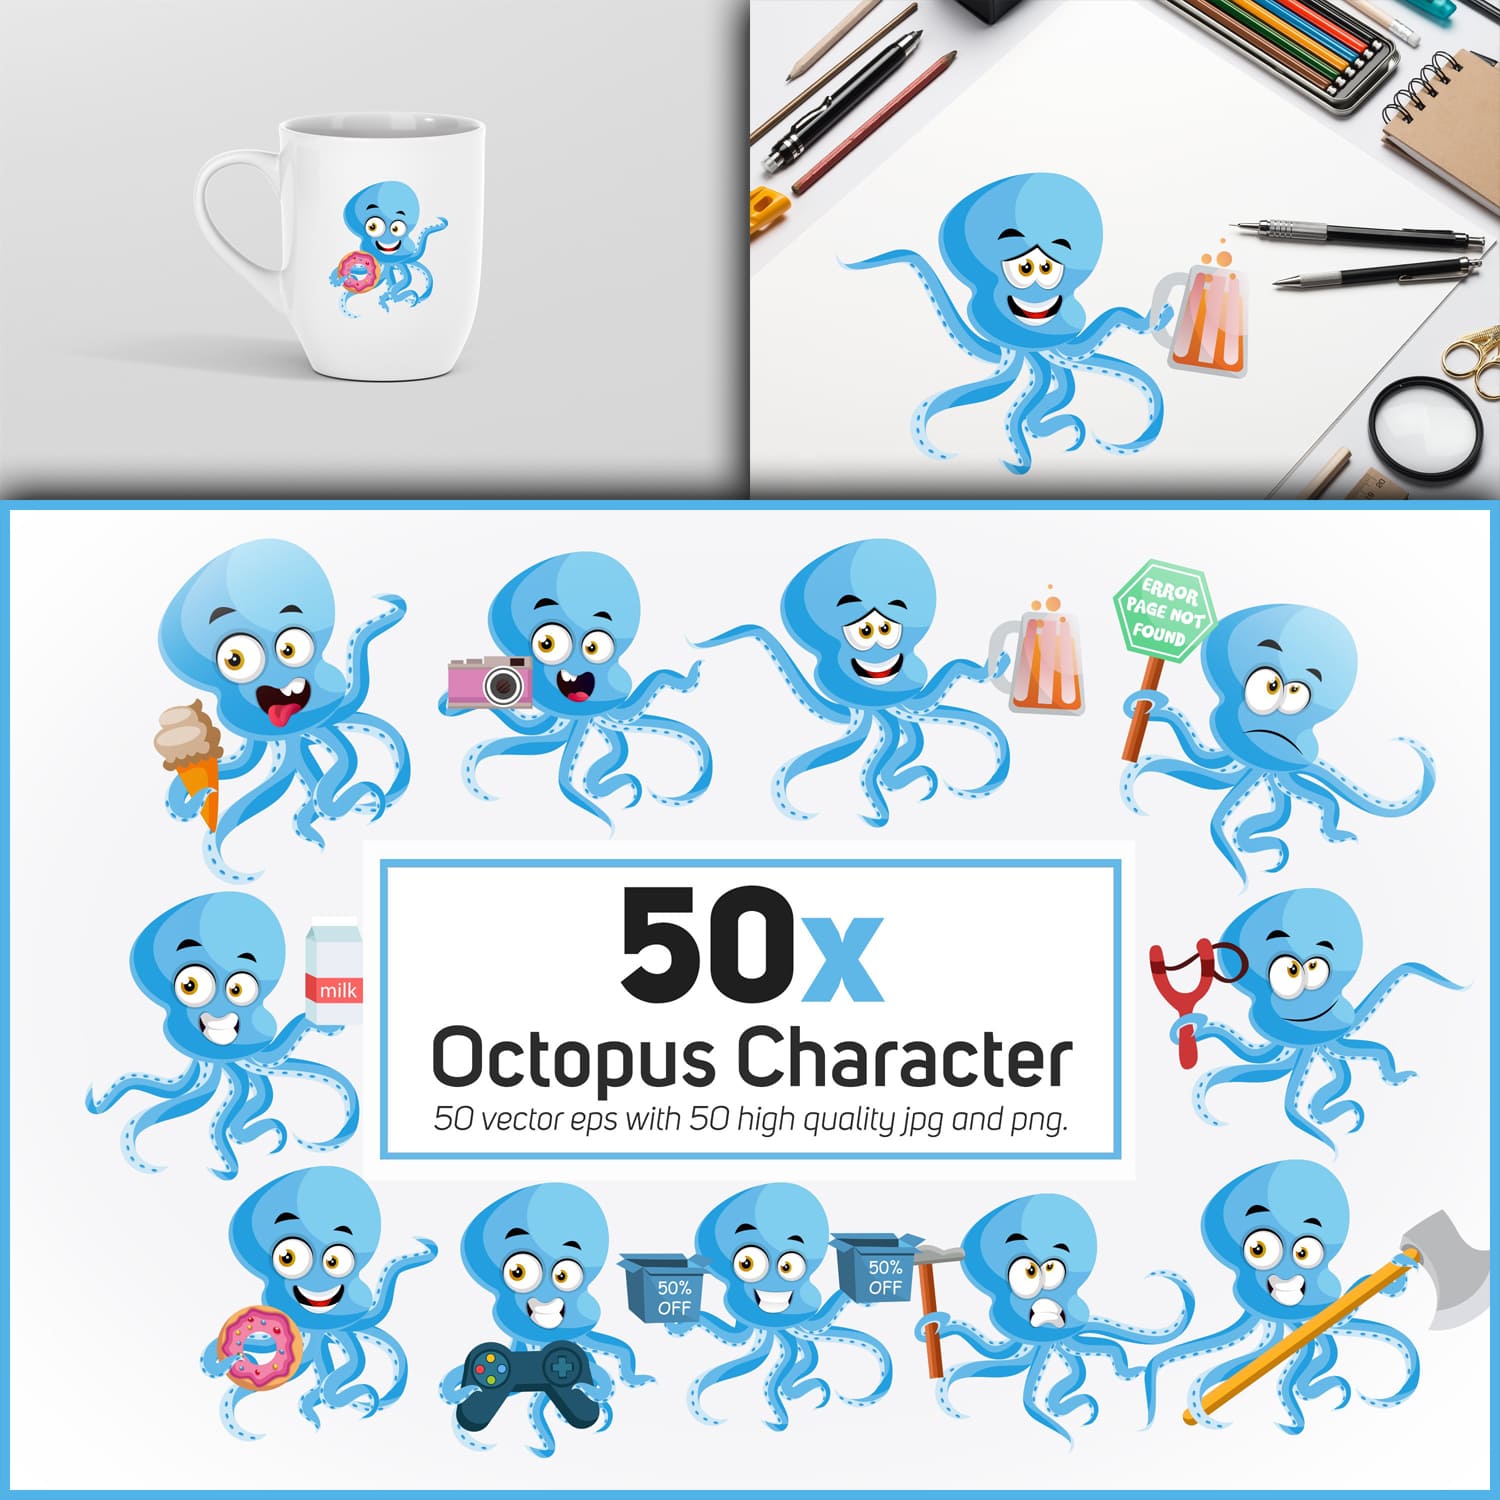 50x Octopus Character and mascot collection illustration. cover.